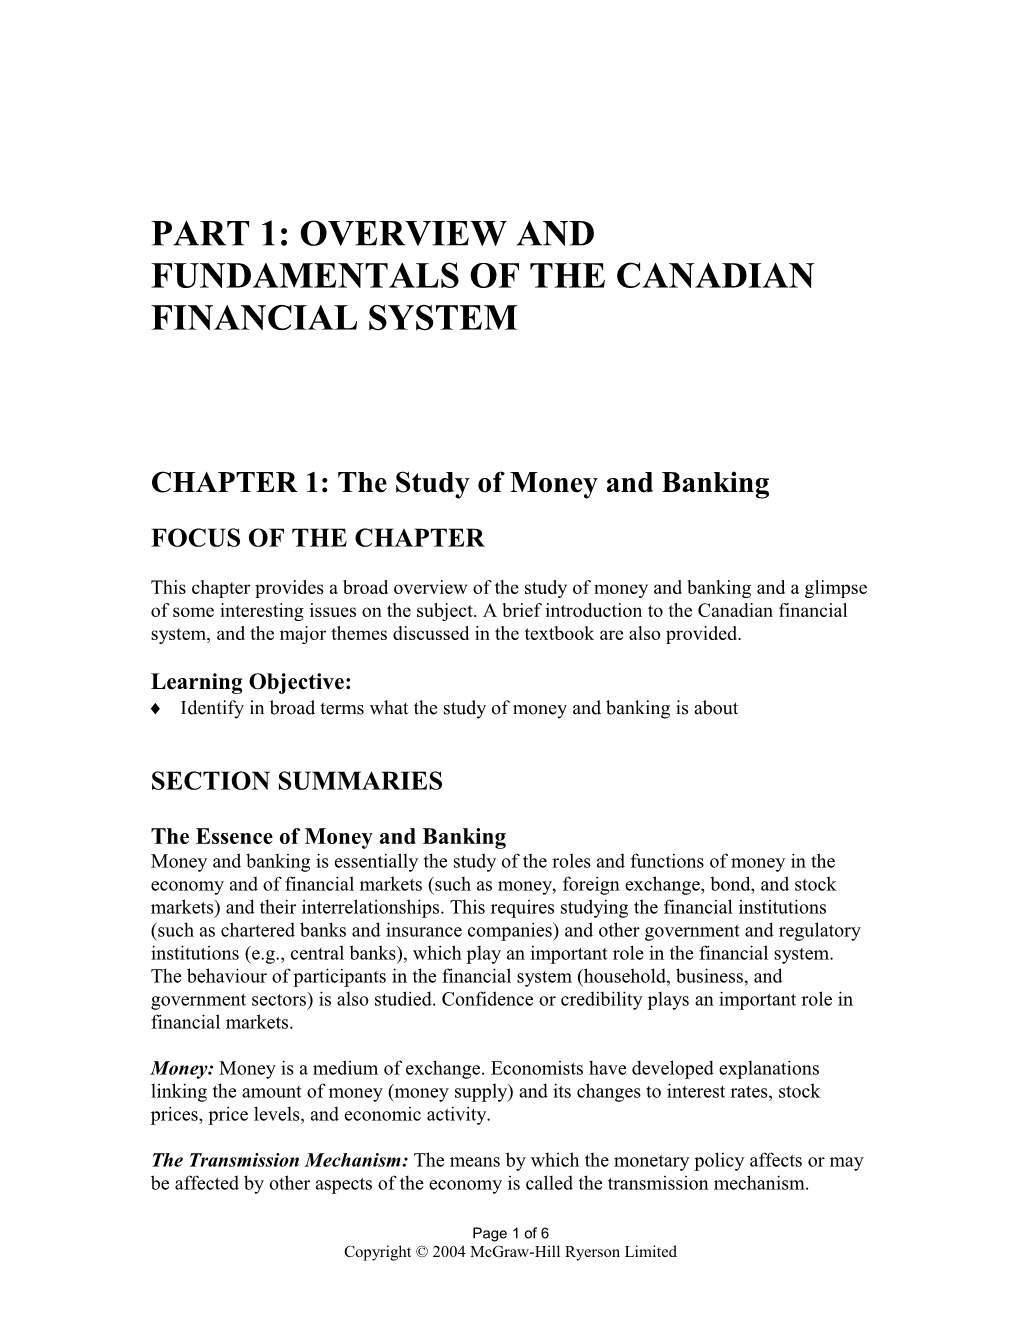 CHAPTER 1: the Study of Money and Banking